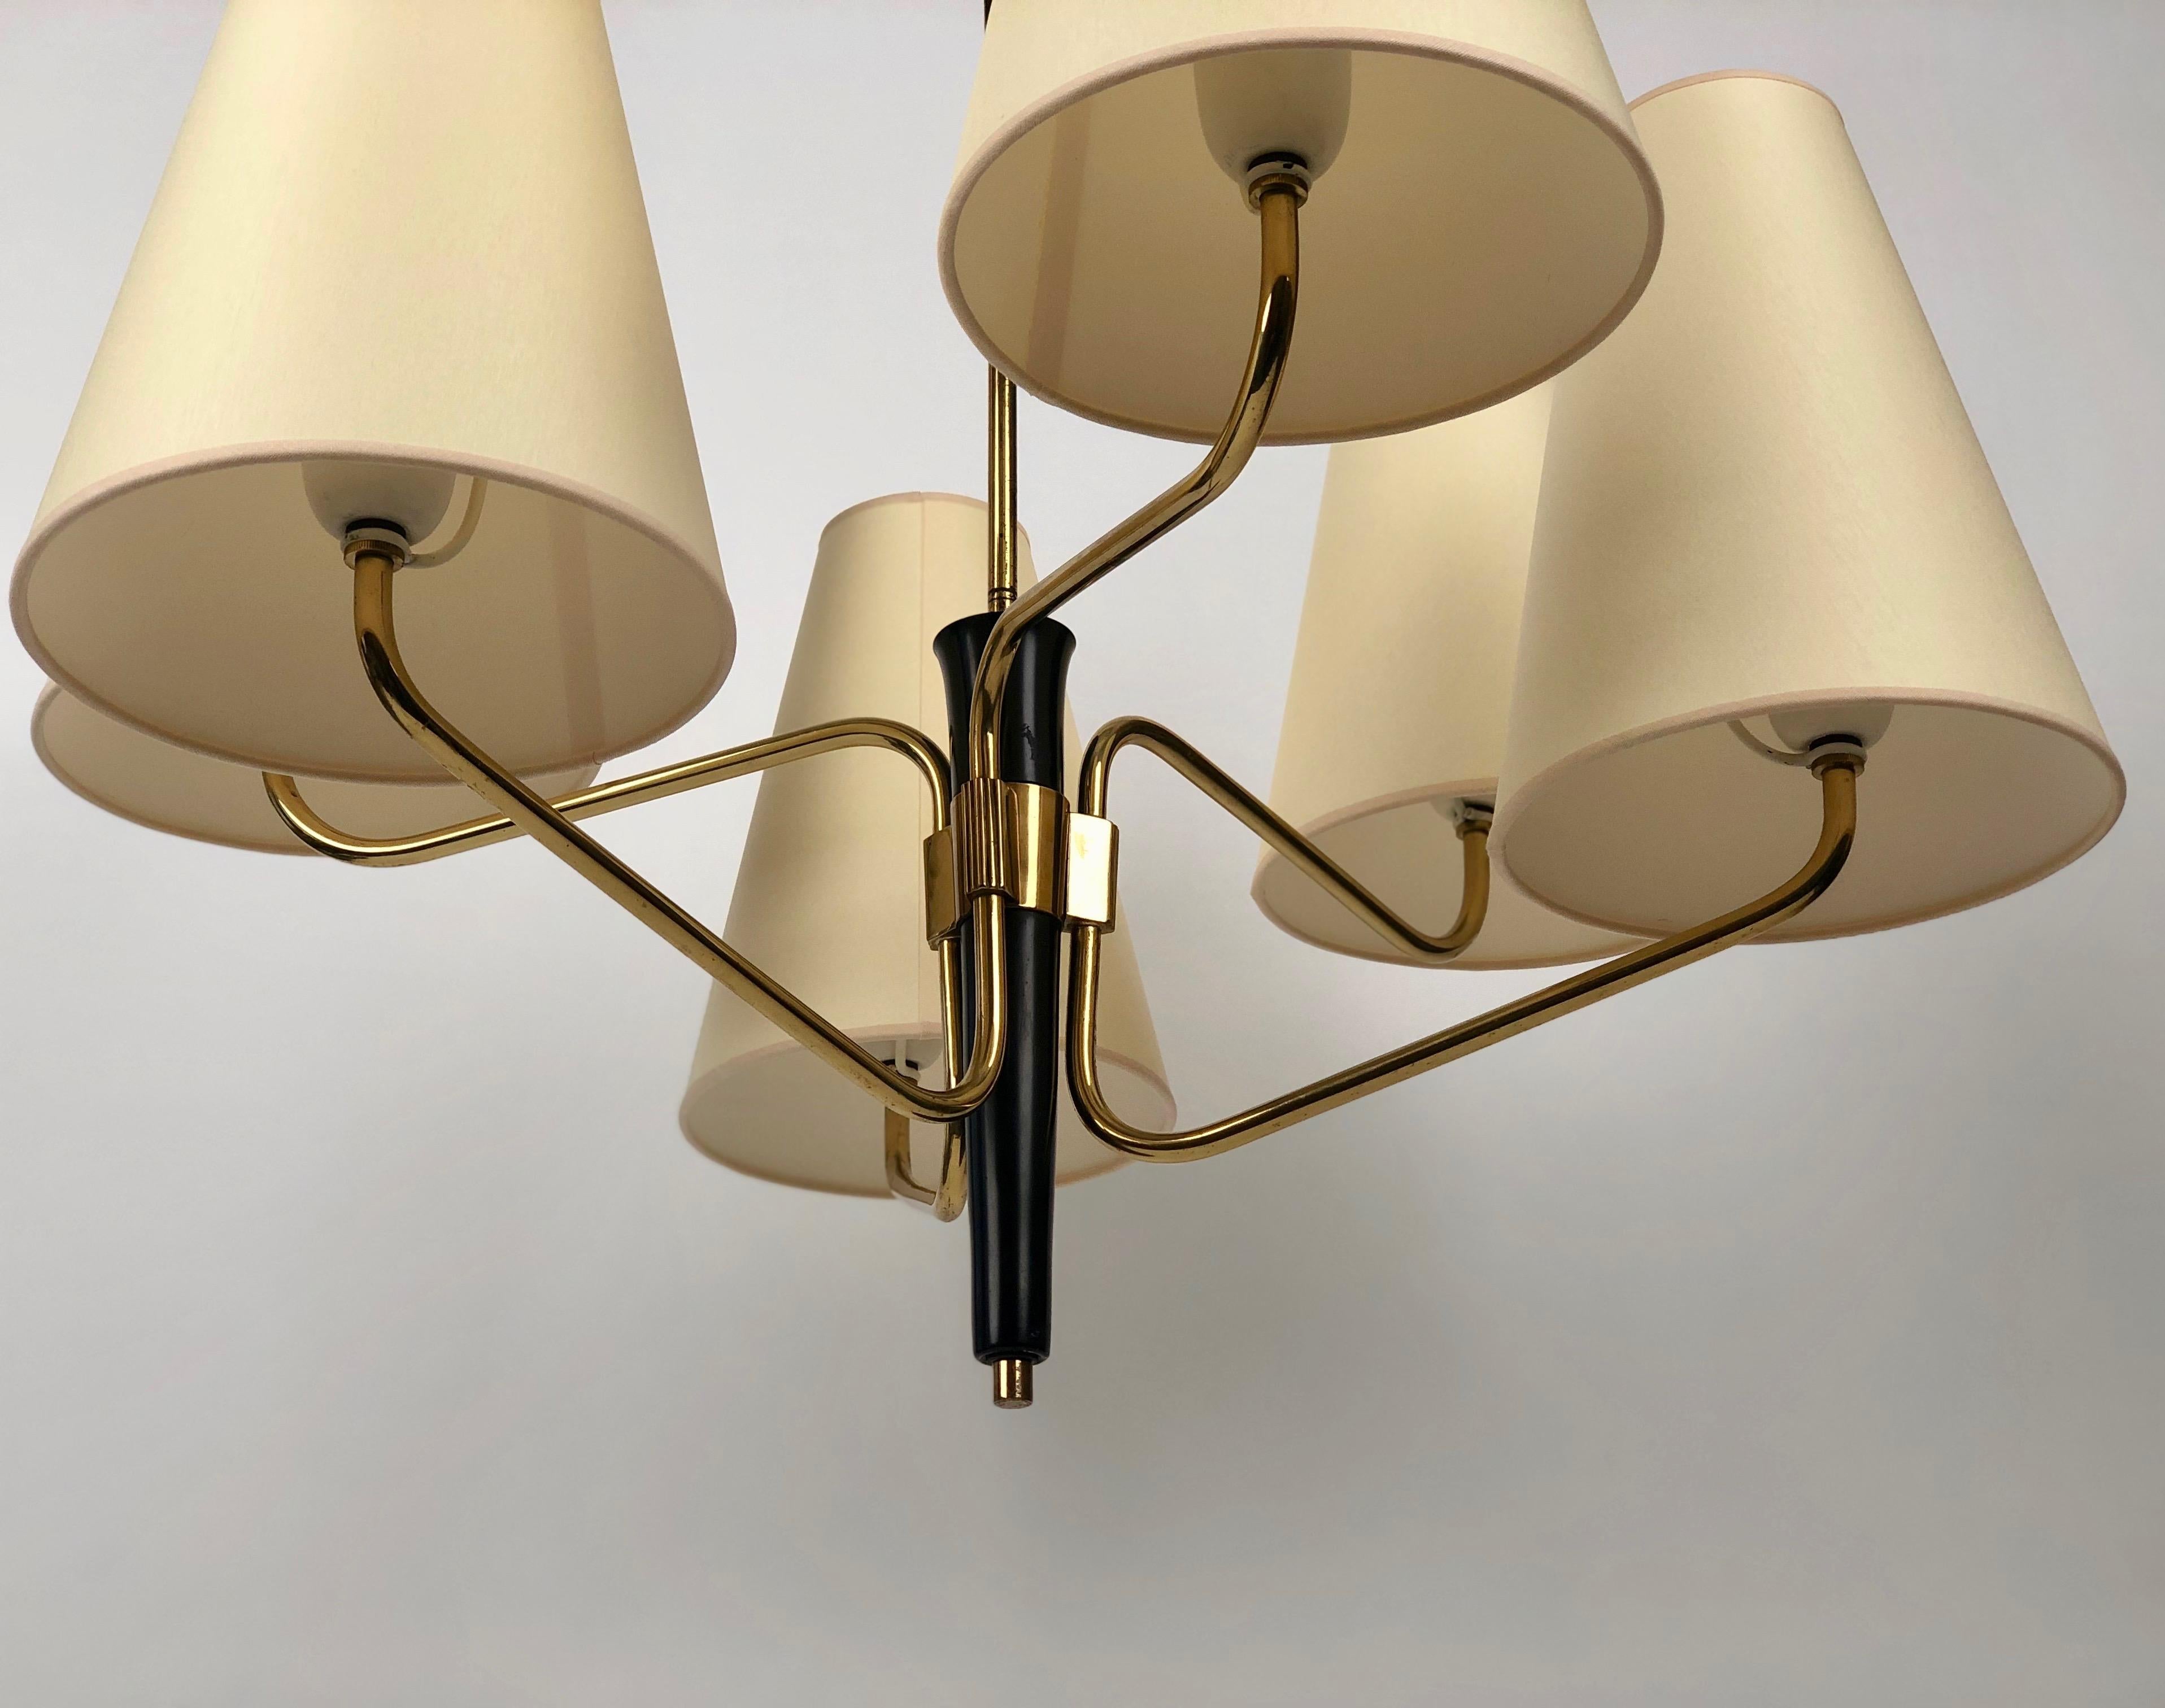 Austrian Midcentury Pendant Lamp in Brass from Rupert Nikoll, Austria with 6 Silk Shades For Sale